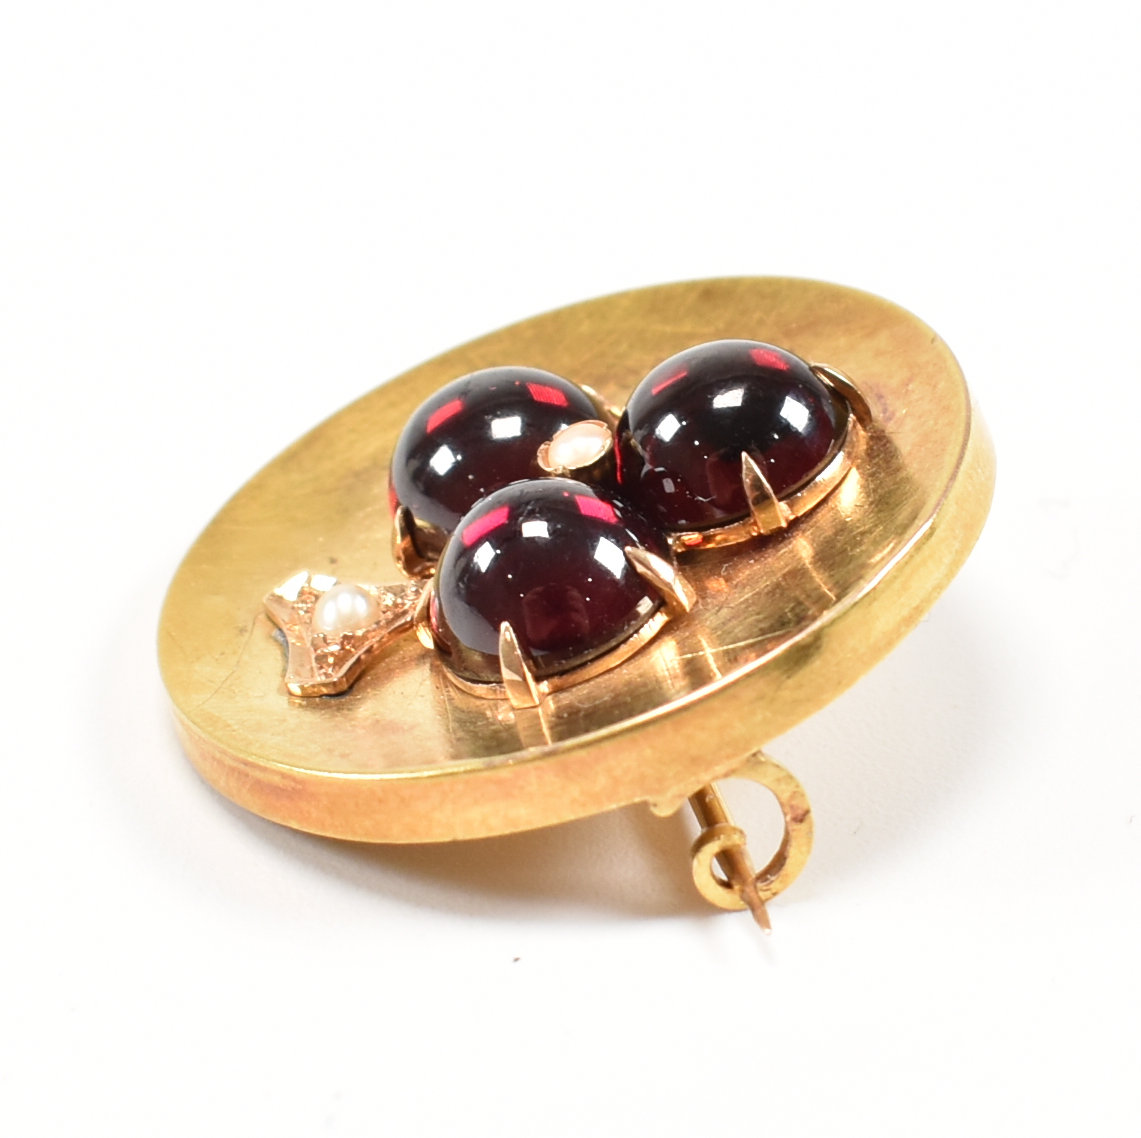 FRENCH 18CT GOLD GARNET & PEARL CLUB BROOCH PIN - Image 5 of 7